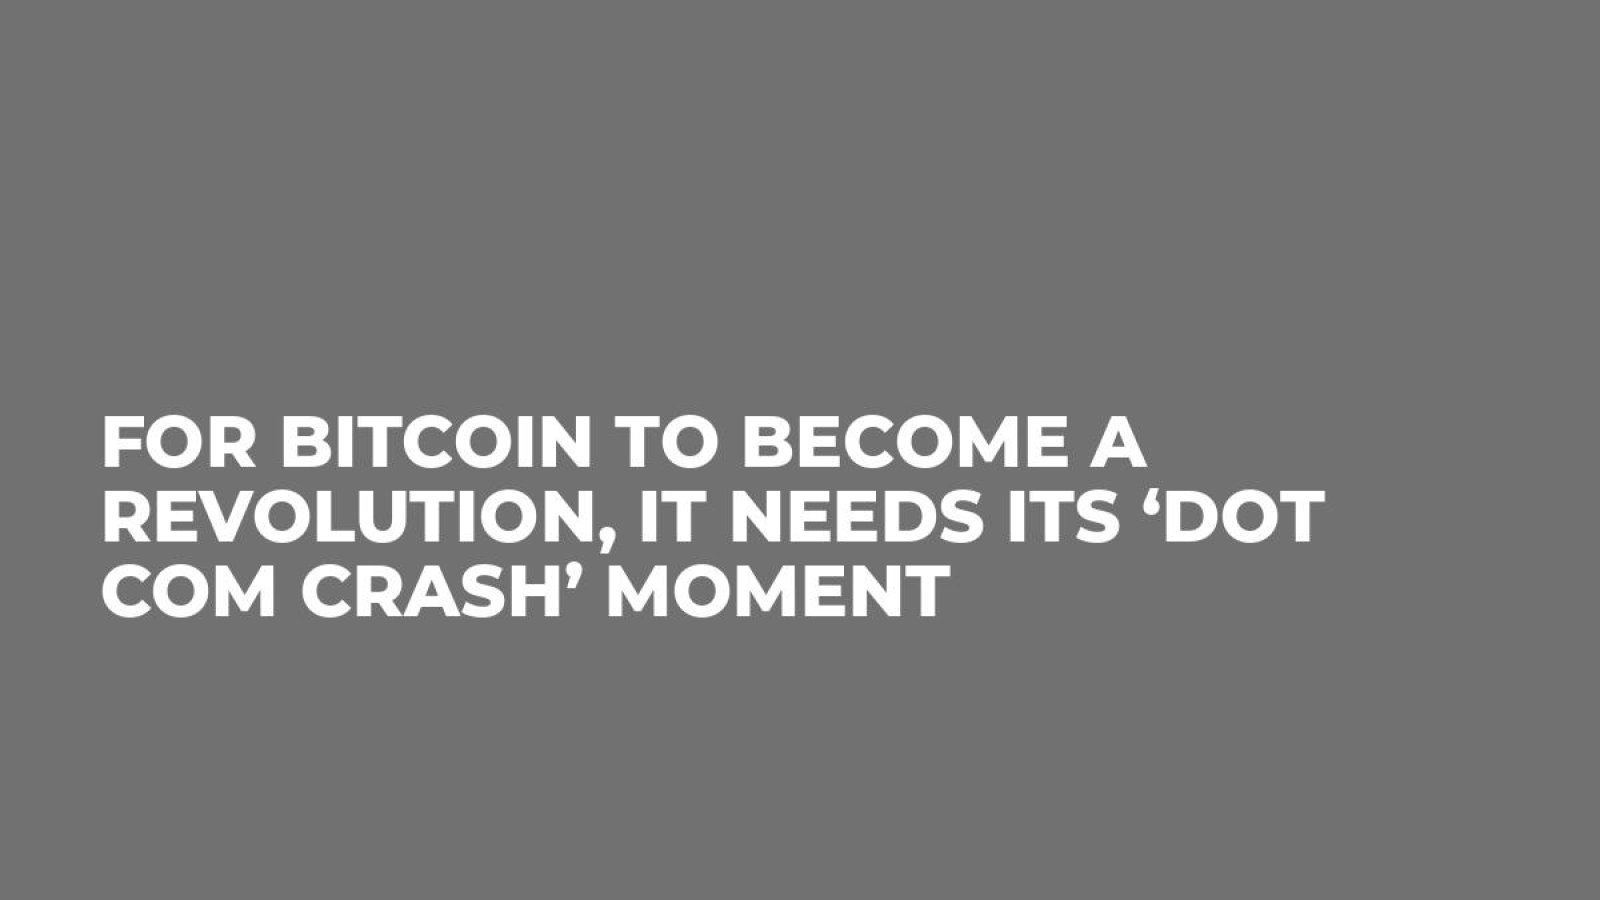 For Bitcoin to Become a Revolution, it Needs its ‘Dot Com Crash’ Moment